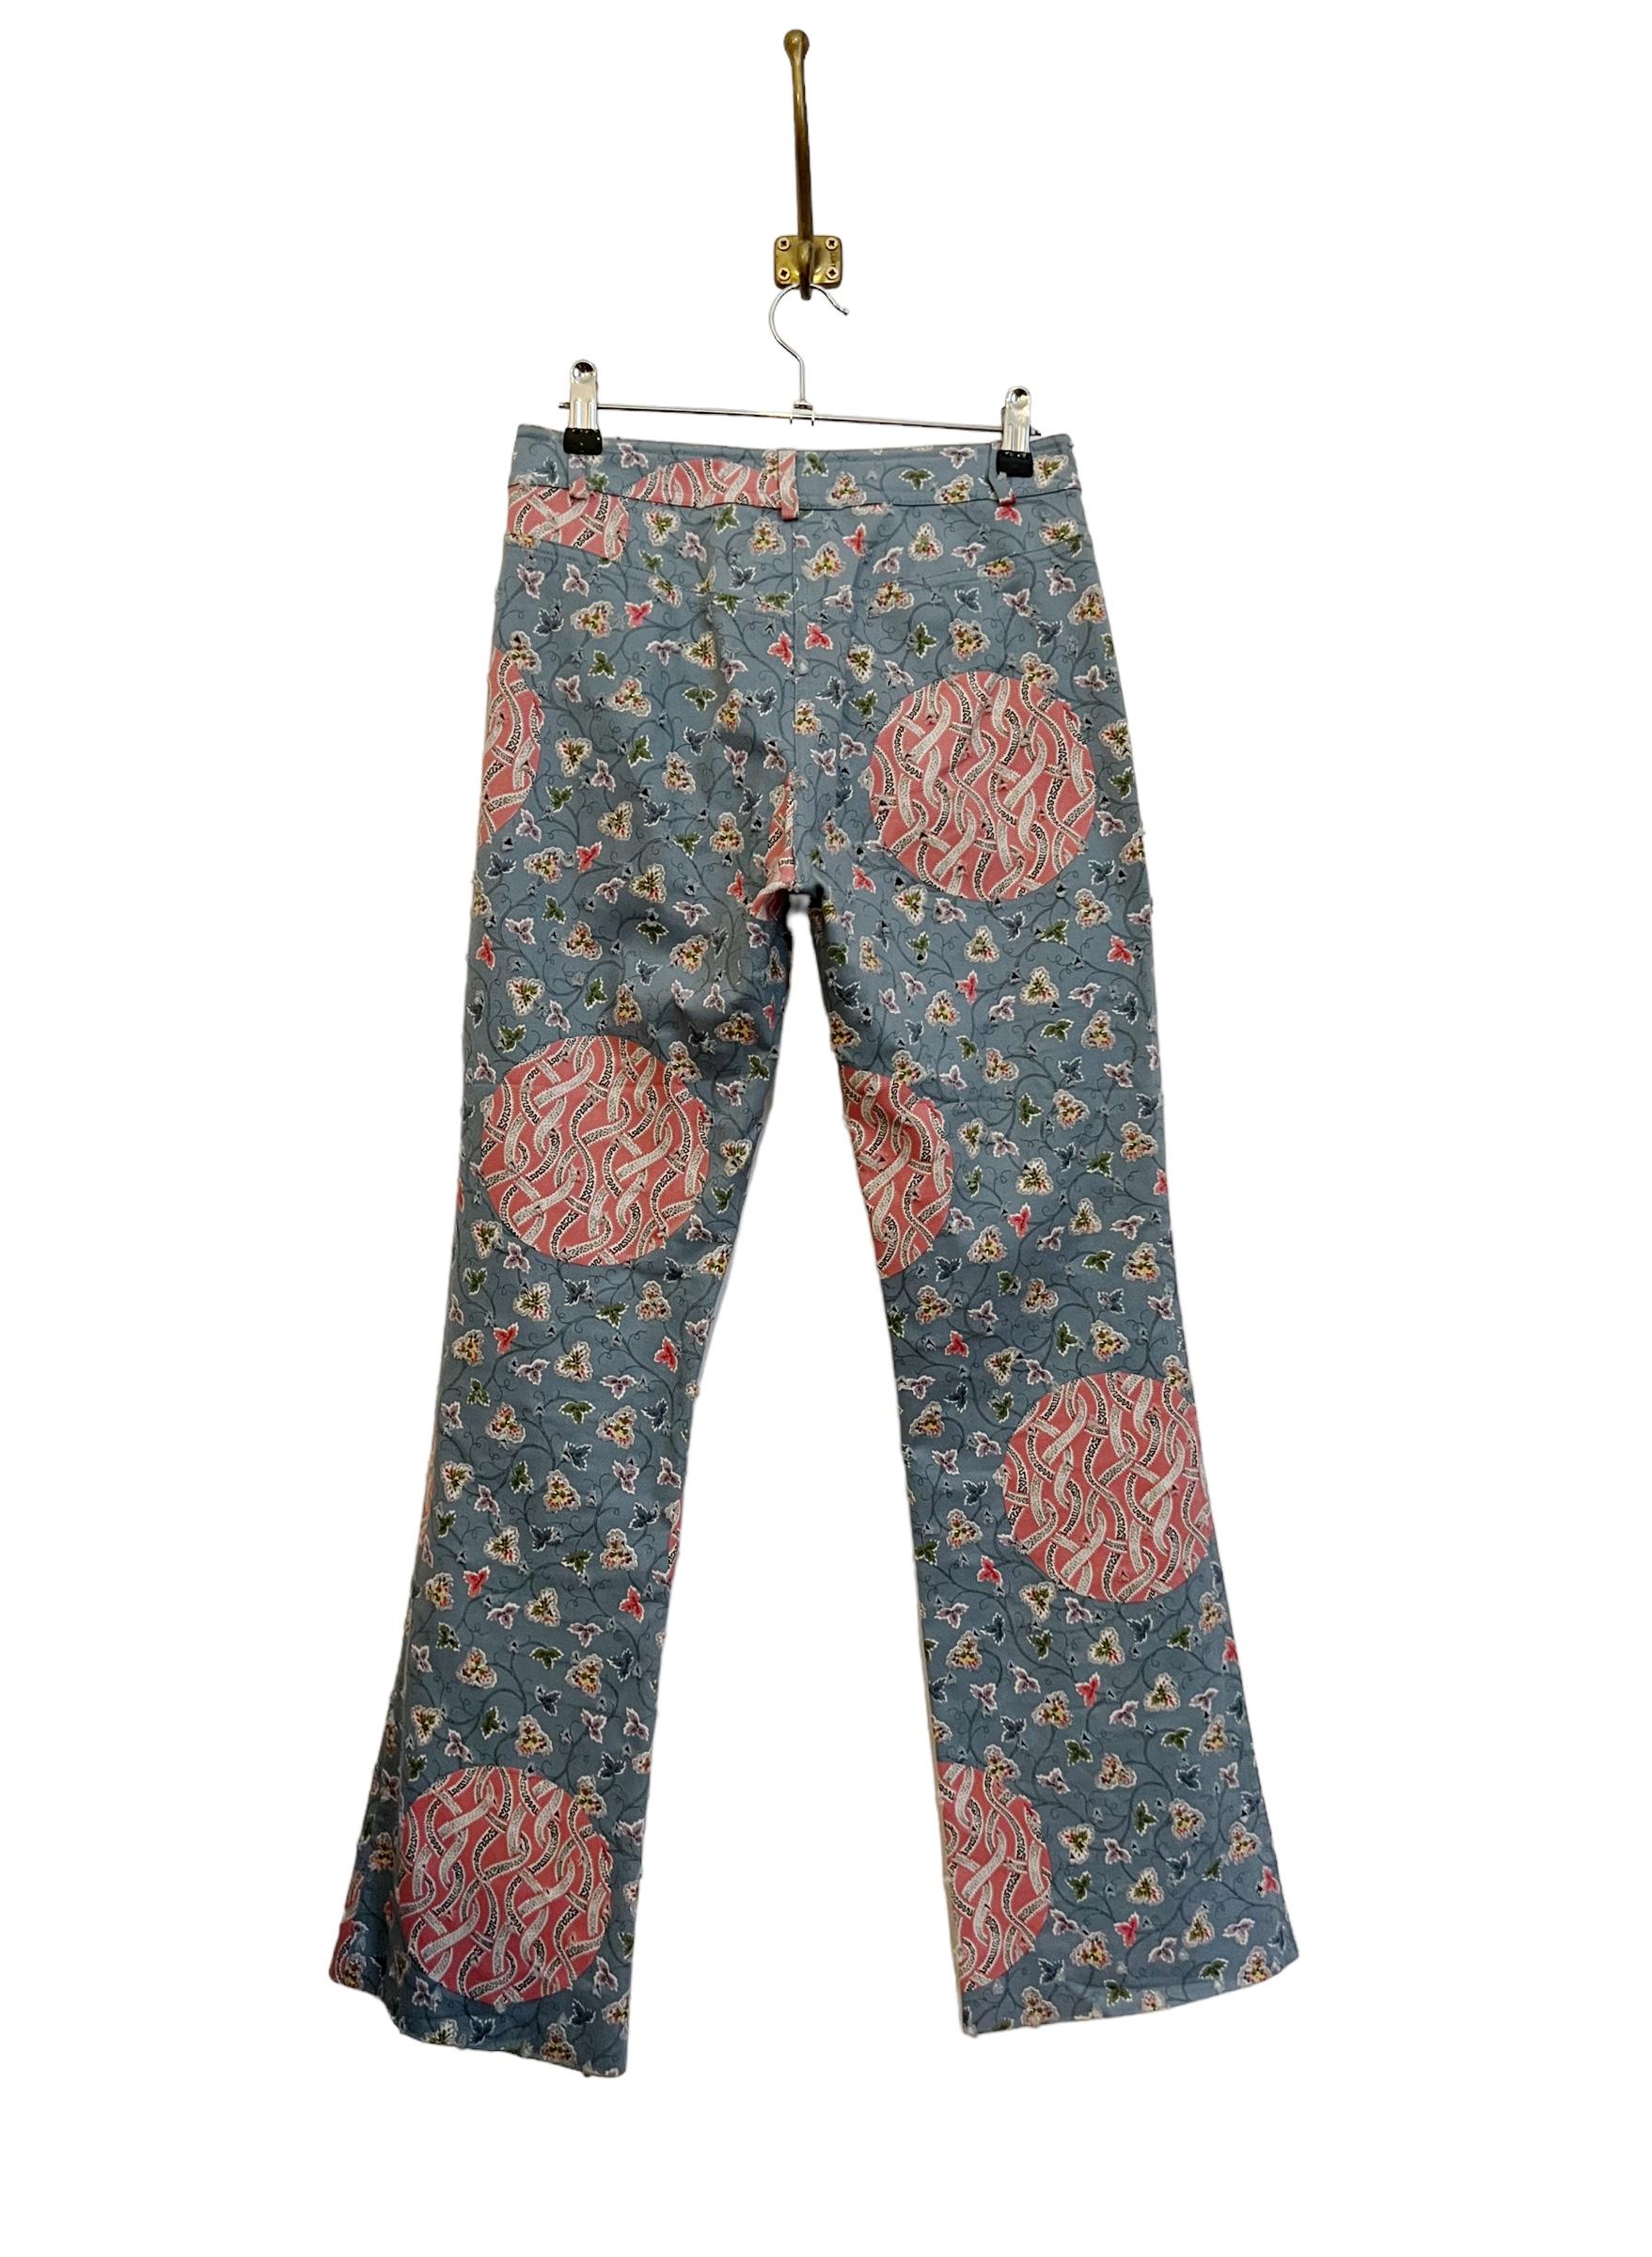 Vintage Y2k Low Rise Christian Dior by Galliano Floral Blossom pattern Jeans For Sale 3